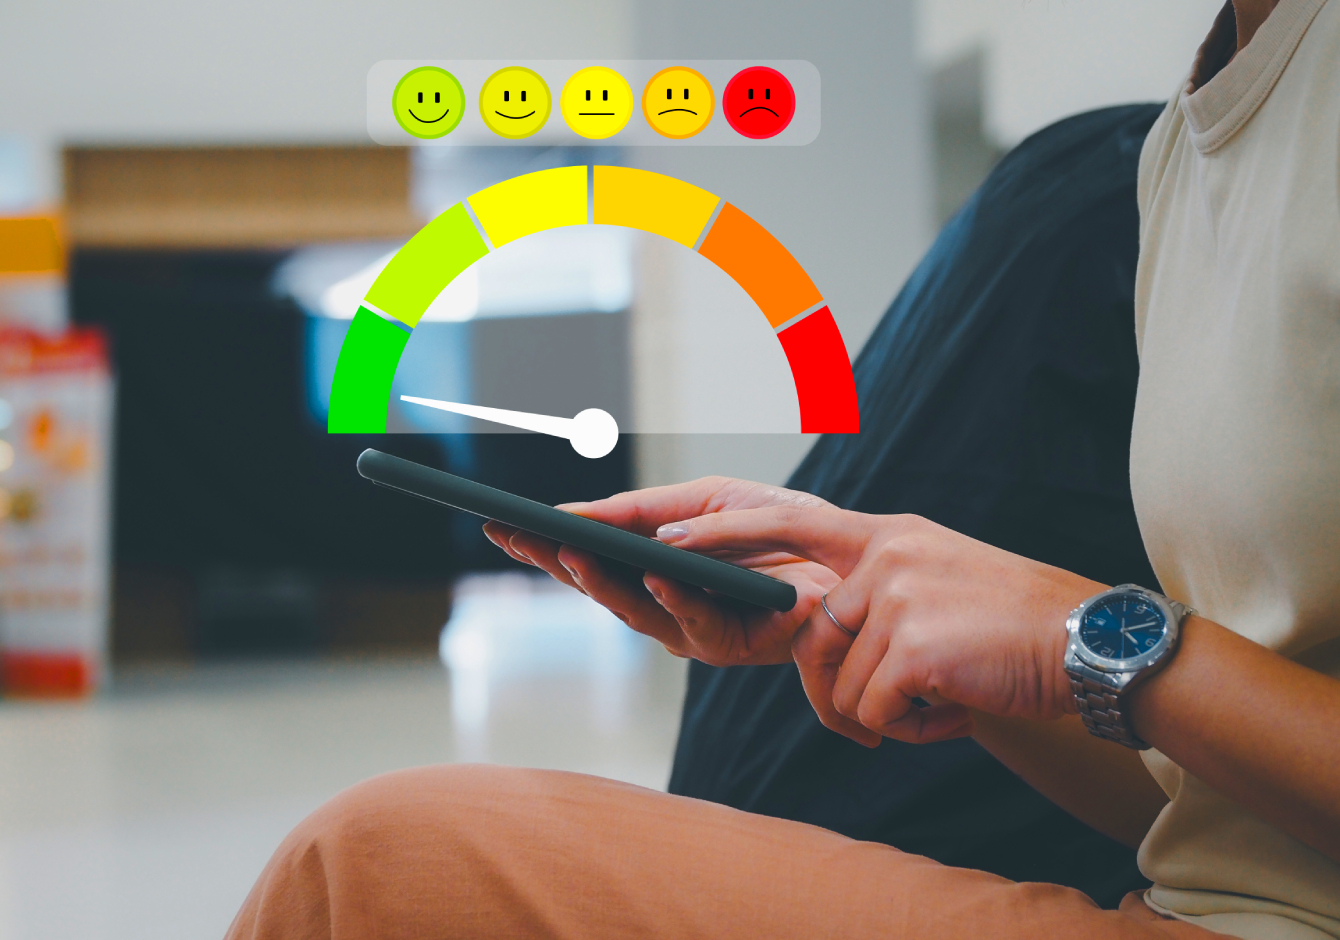 Person using smartphone with red, orange and green rating scale